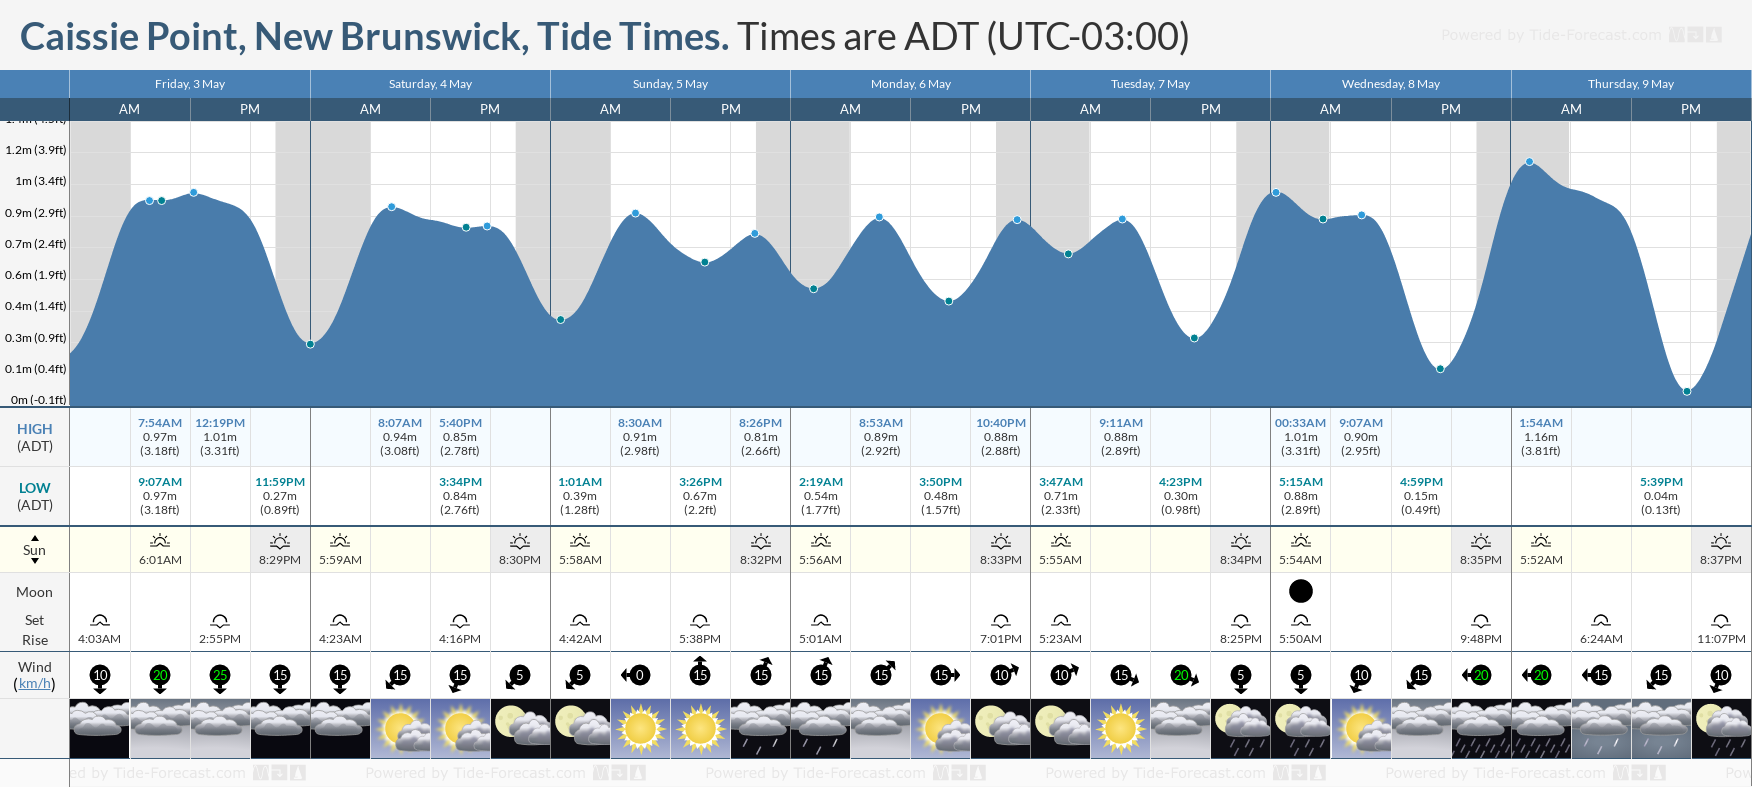 Caissie Point, New Brunswick Tide Chart including high and low tide times for the next 7 days